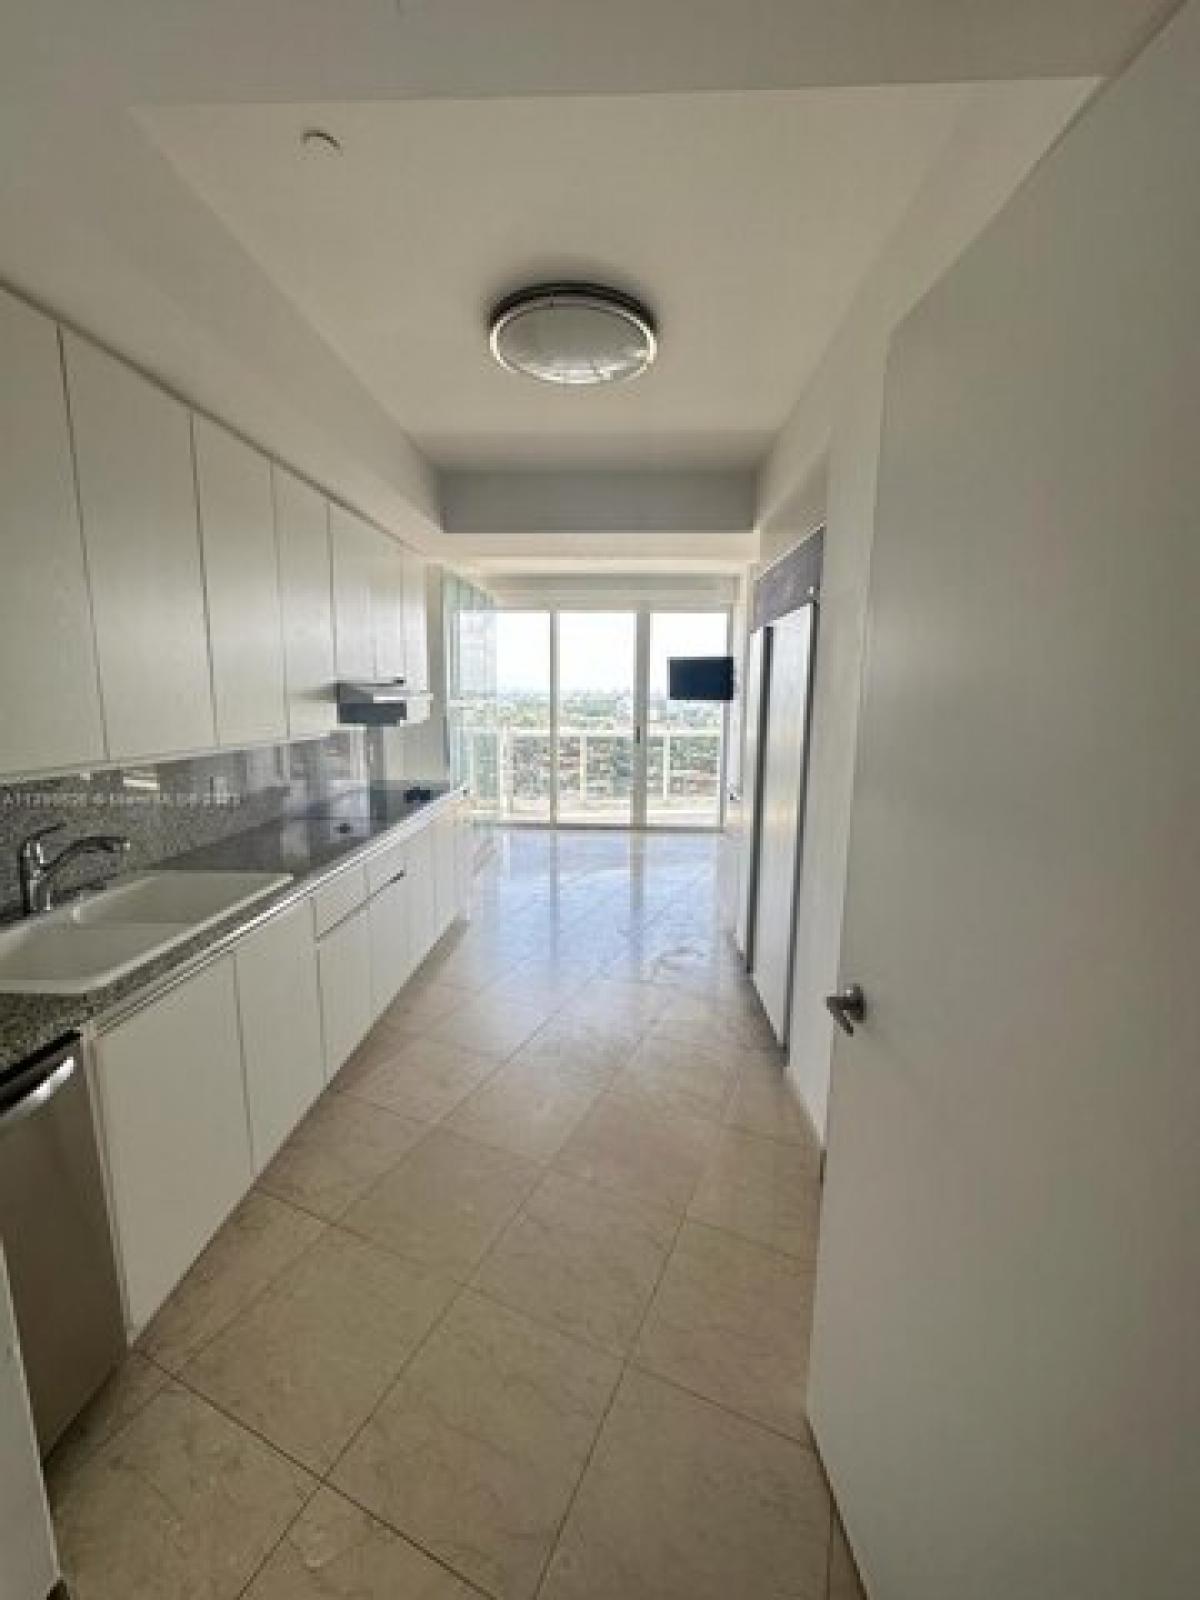 Picture of Apartment For Rent in Bal Harbour, Florida, United States